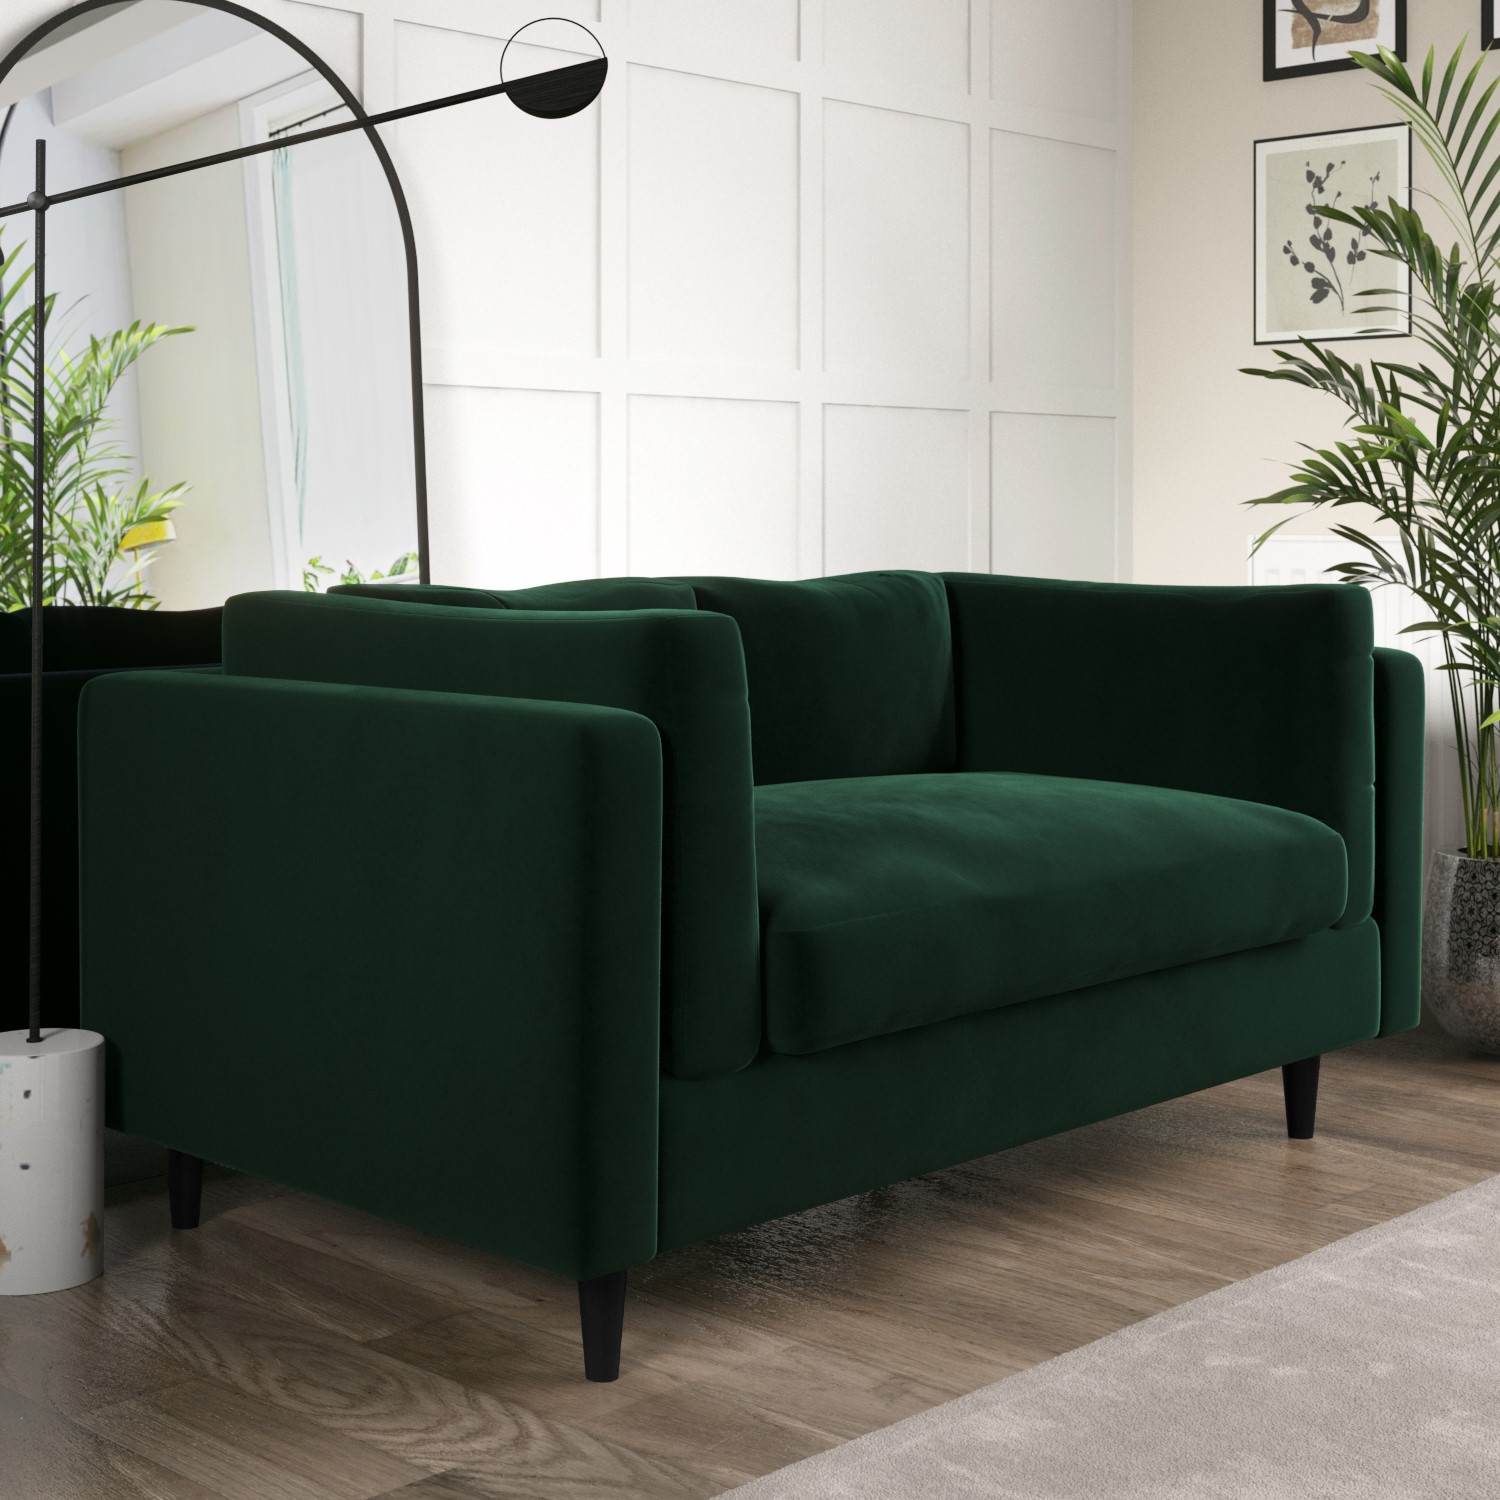 Read more about Green velvet 2 seater sofa in a box frankie